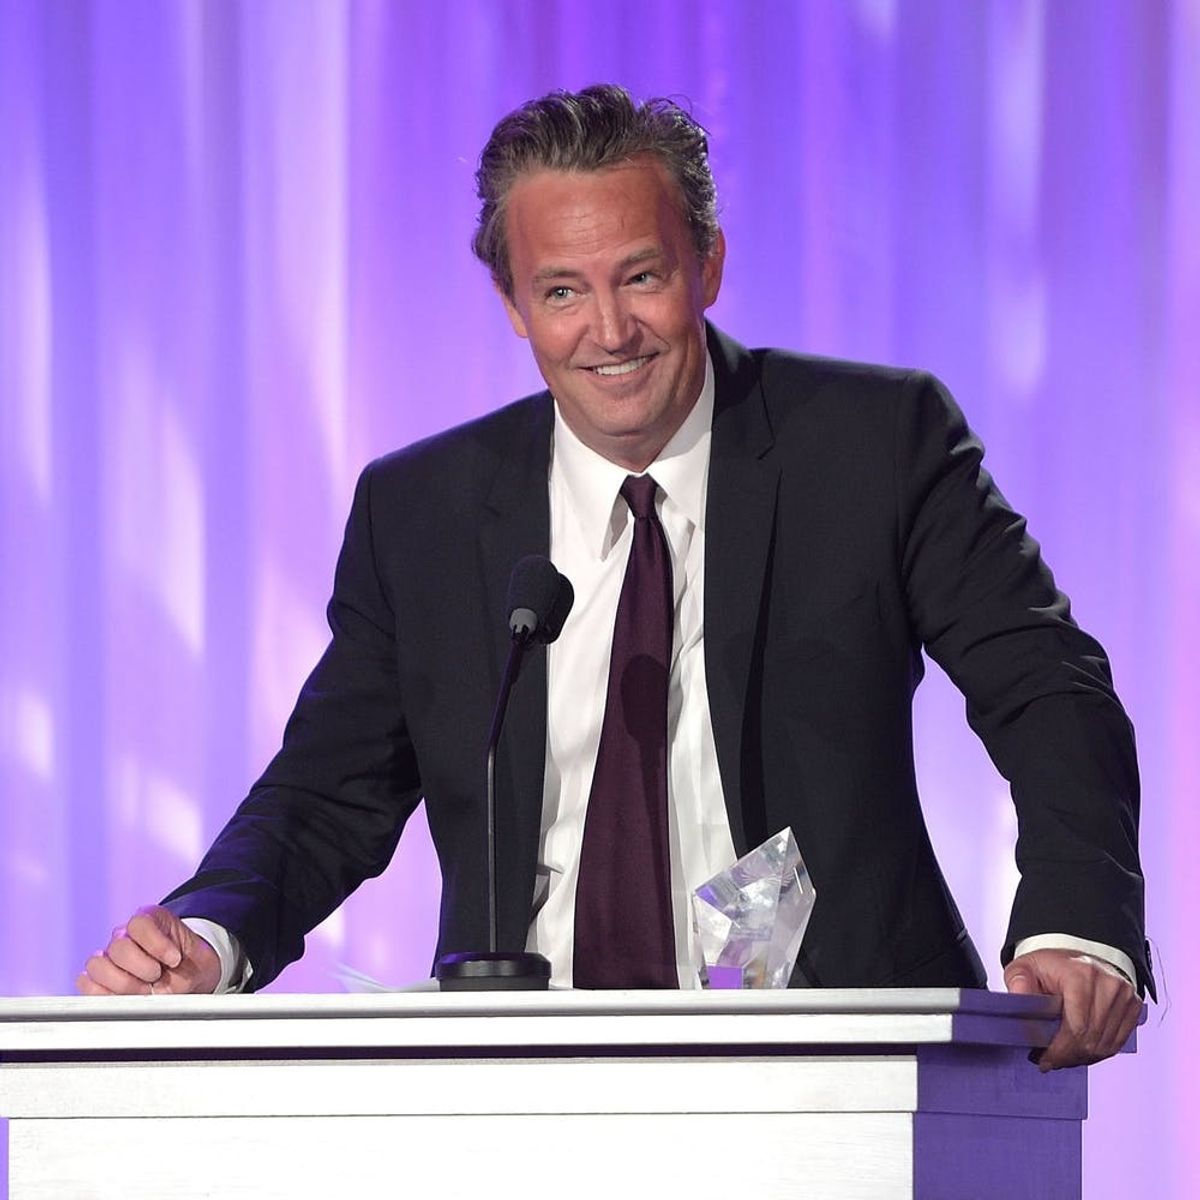 The Idea of a Friends Reboot Gives Matthew Perry Nightmares